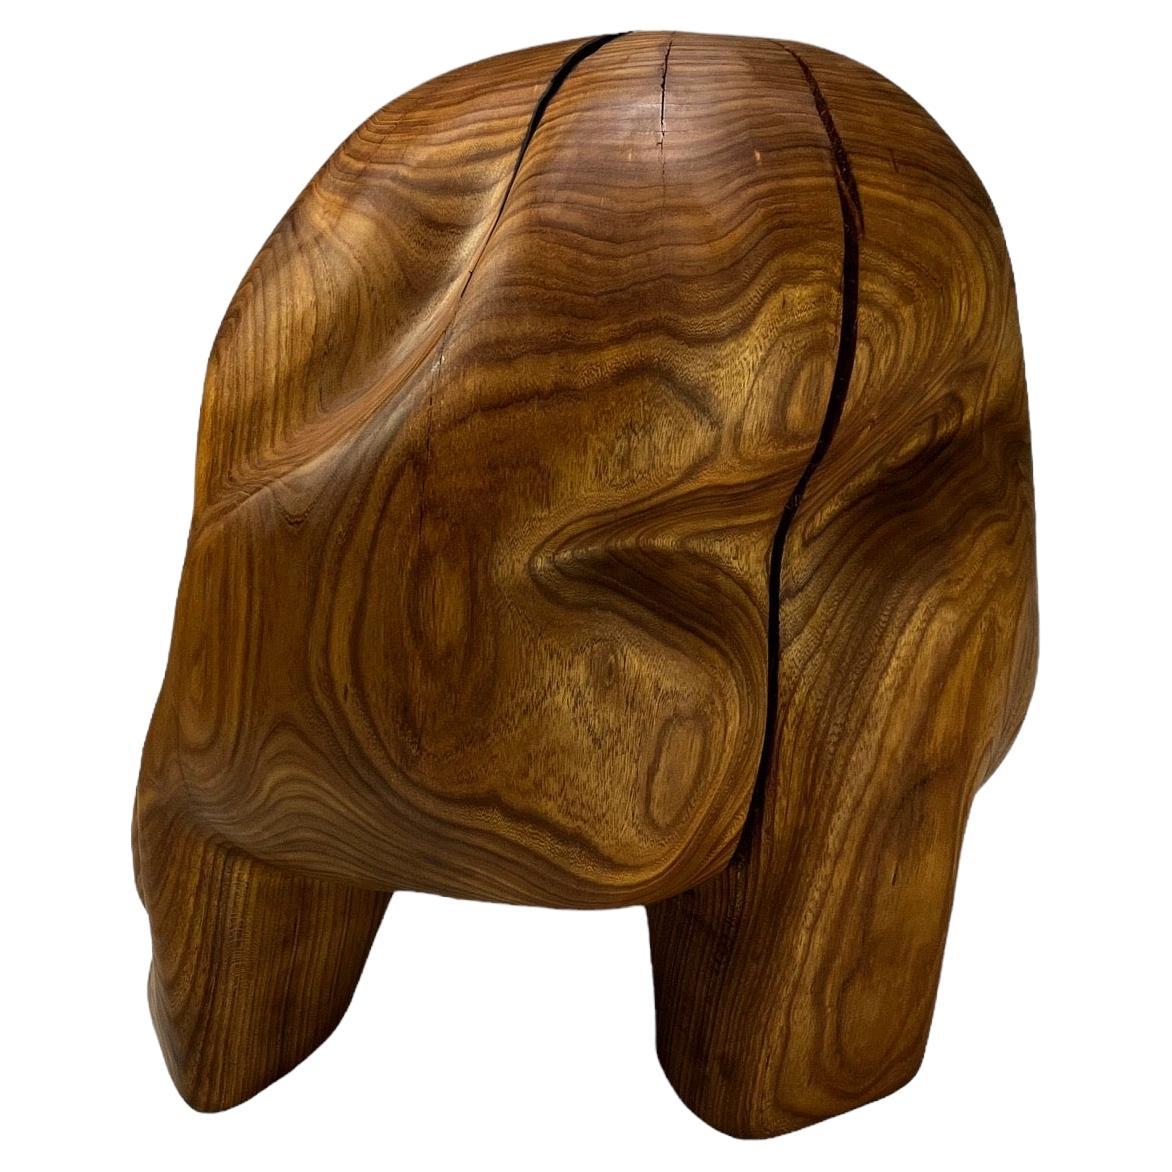 Contemporary sculptural carved wooden stool "The Golden Stool" by ELAKFORM For Sale